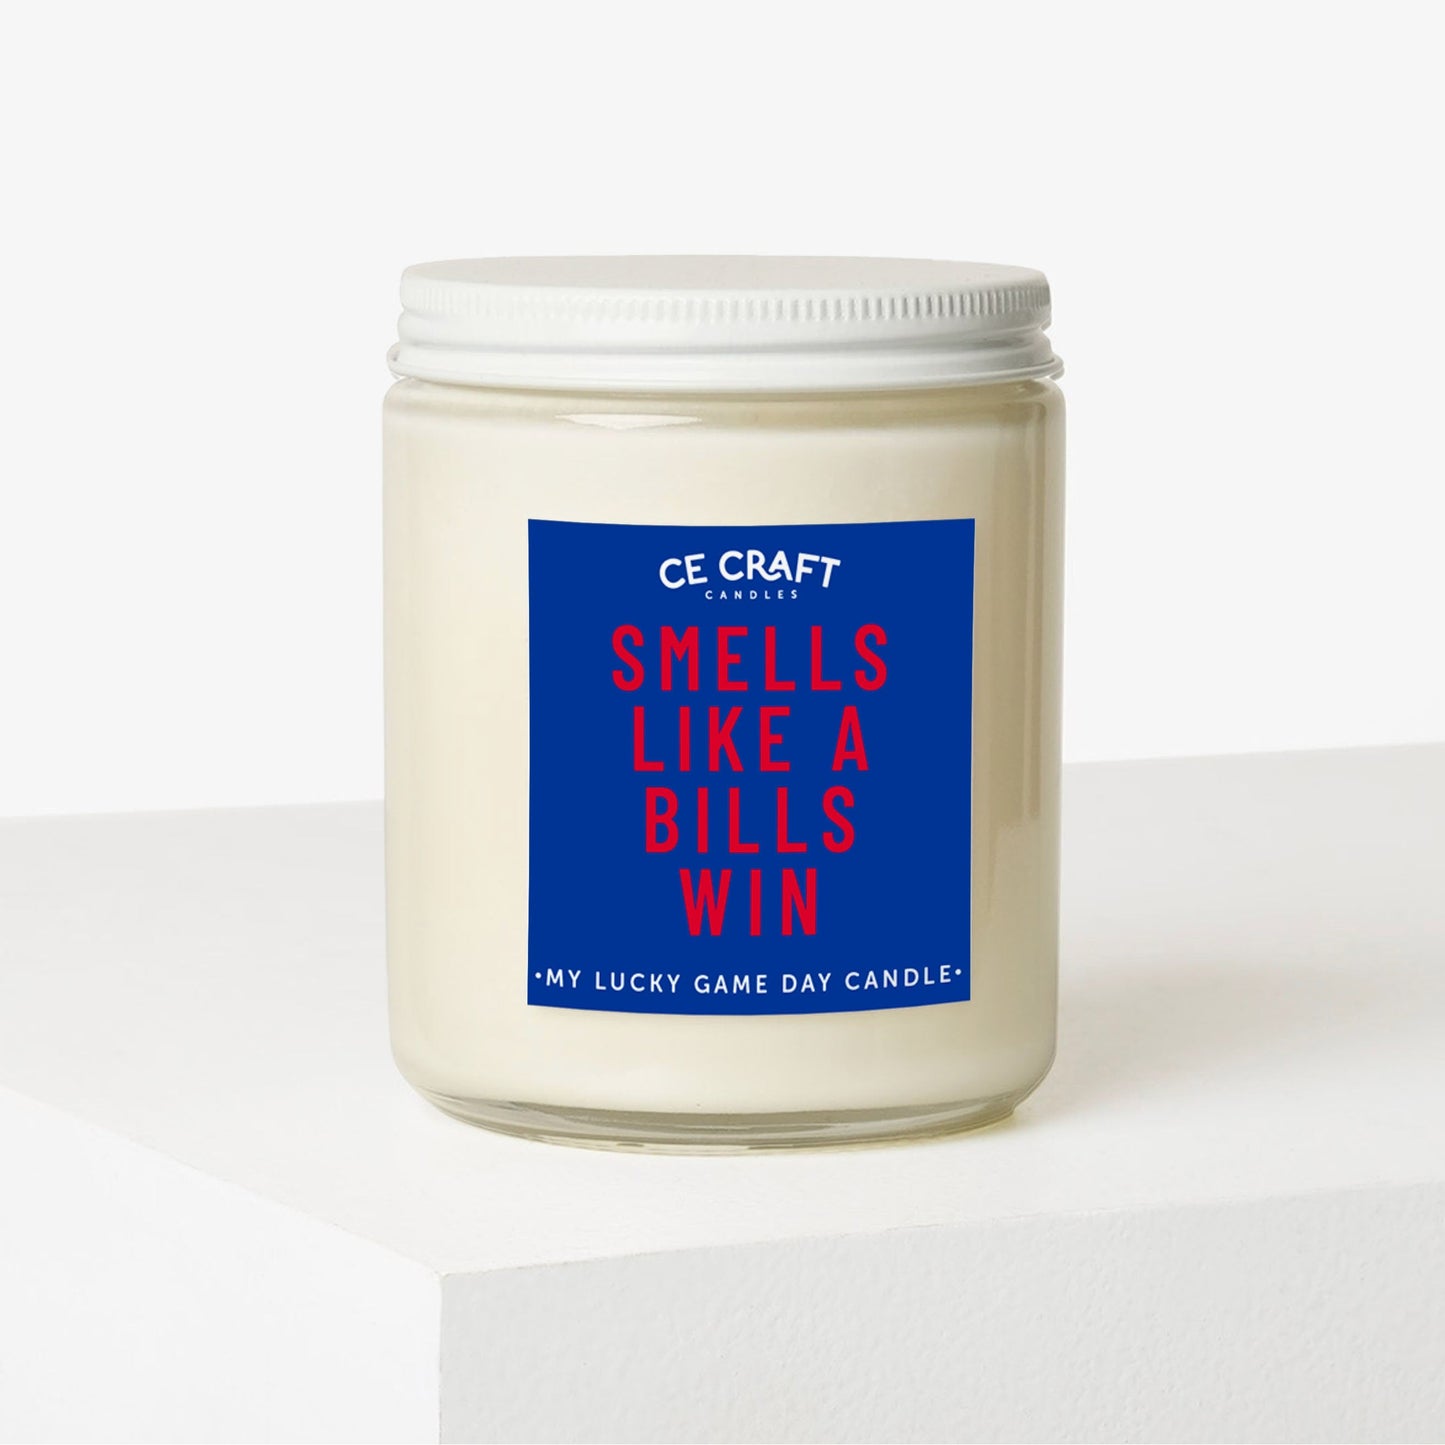 Smells Like a Bills Win Scented Candle C & E Craft Co 